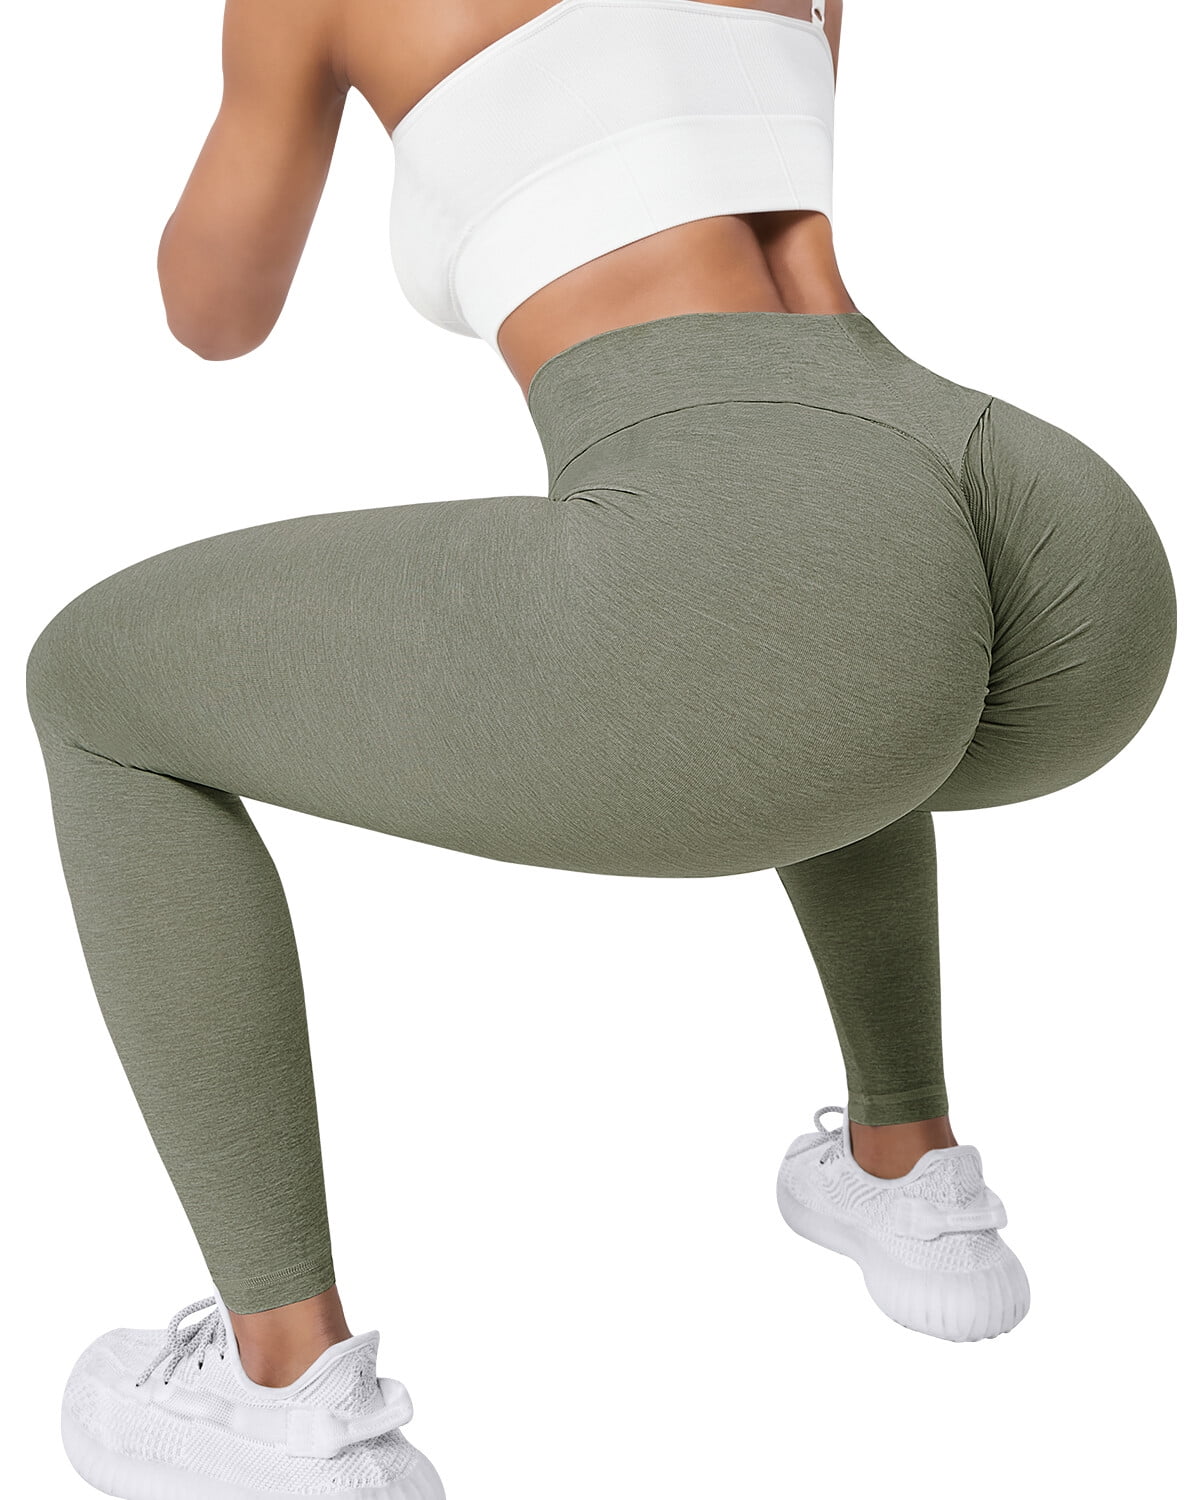 High Waist Yoga Amplify Leggings With Pockets For Women Perfect For Spring  And Summer Sports, Gym, Running, And Jogging Raising Hips And Sweatpants  For Workout From Clothes0708, $15.68